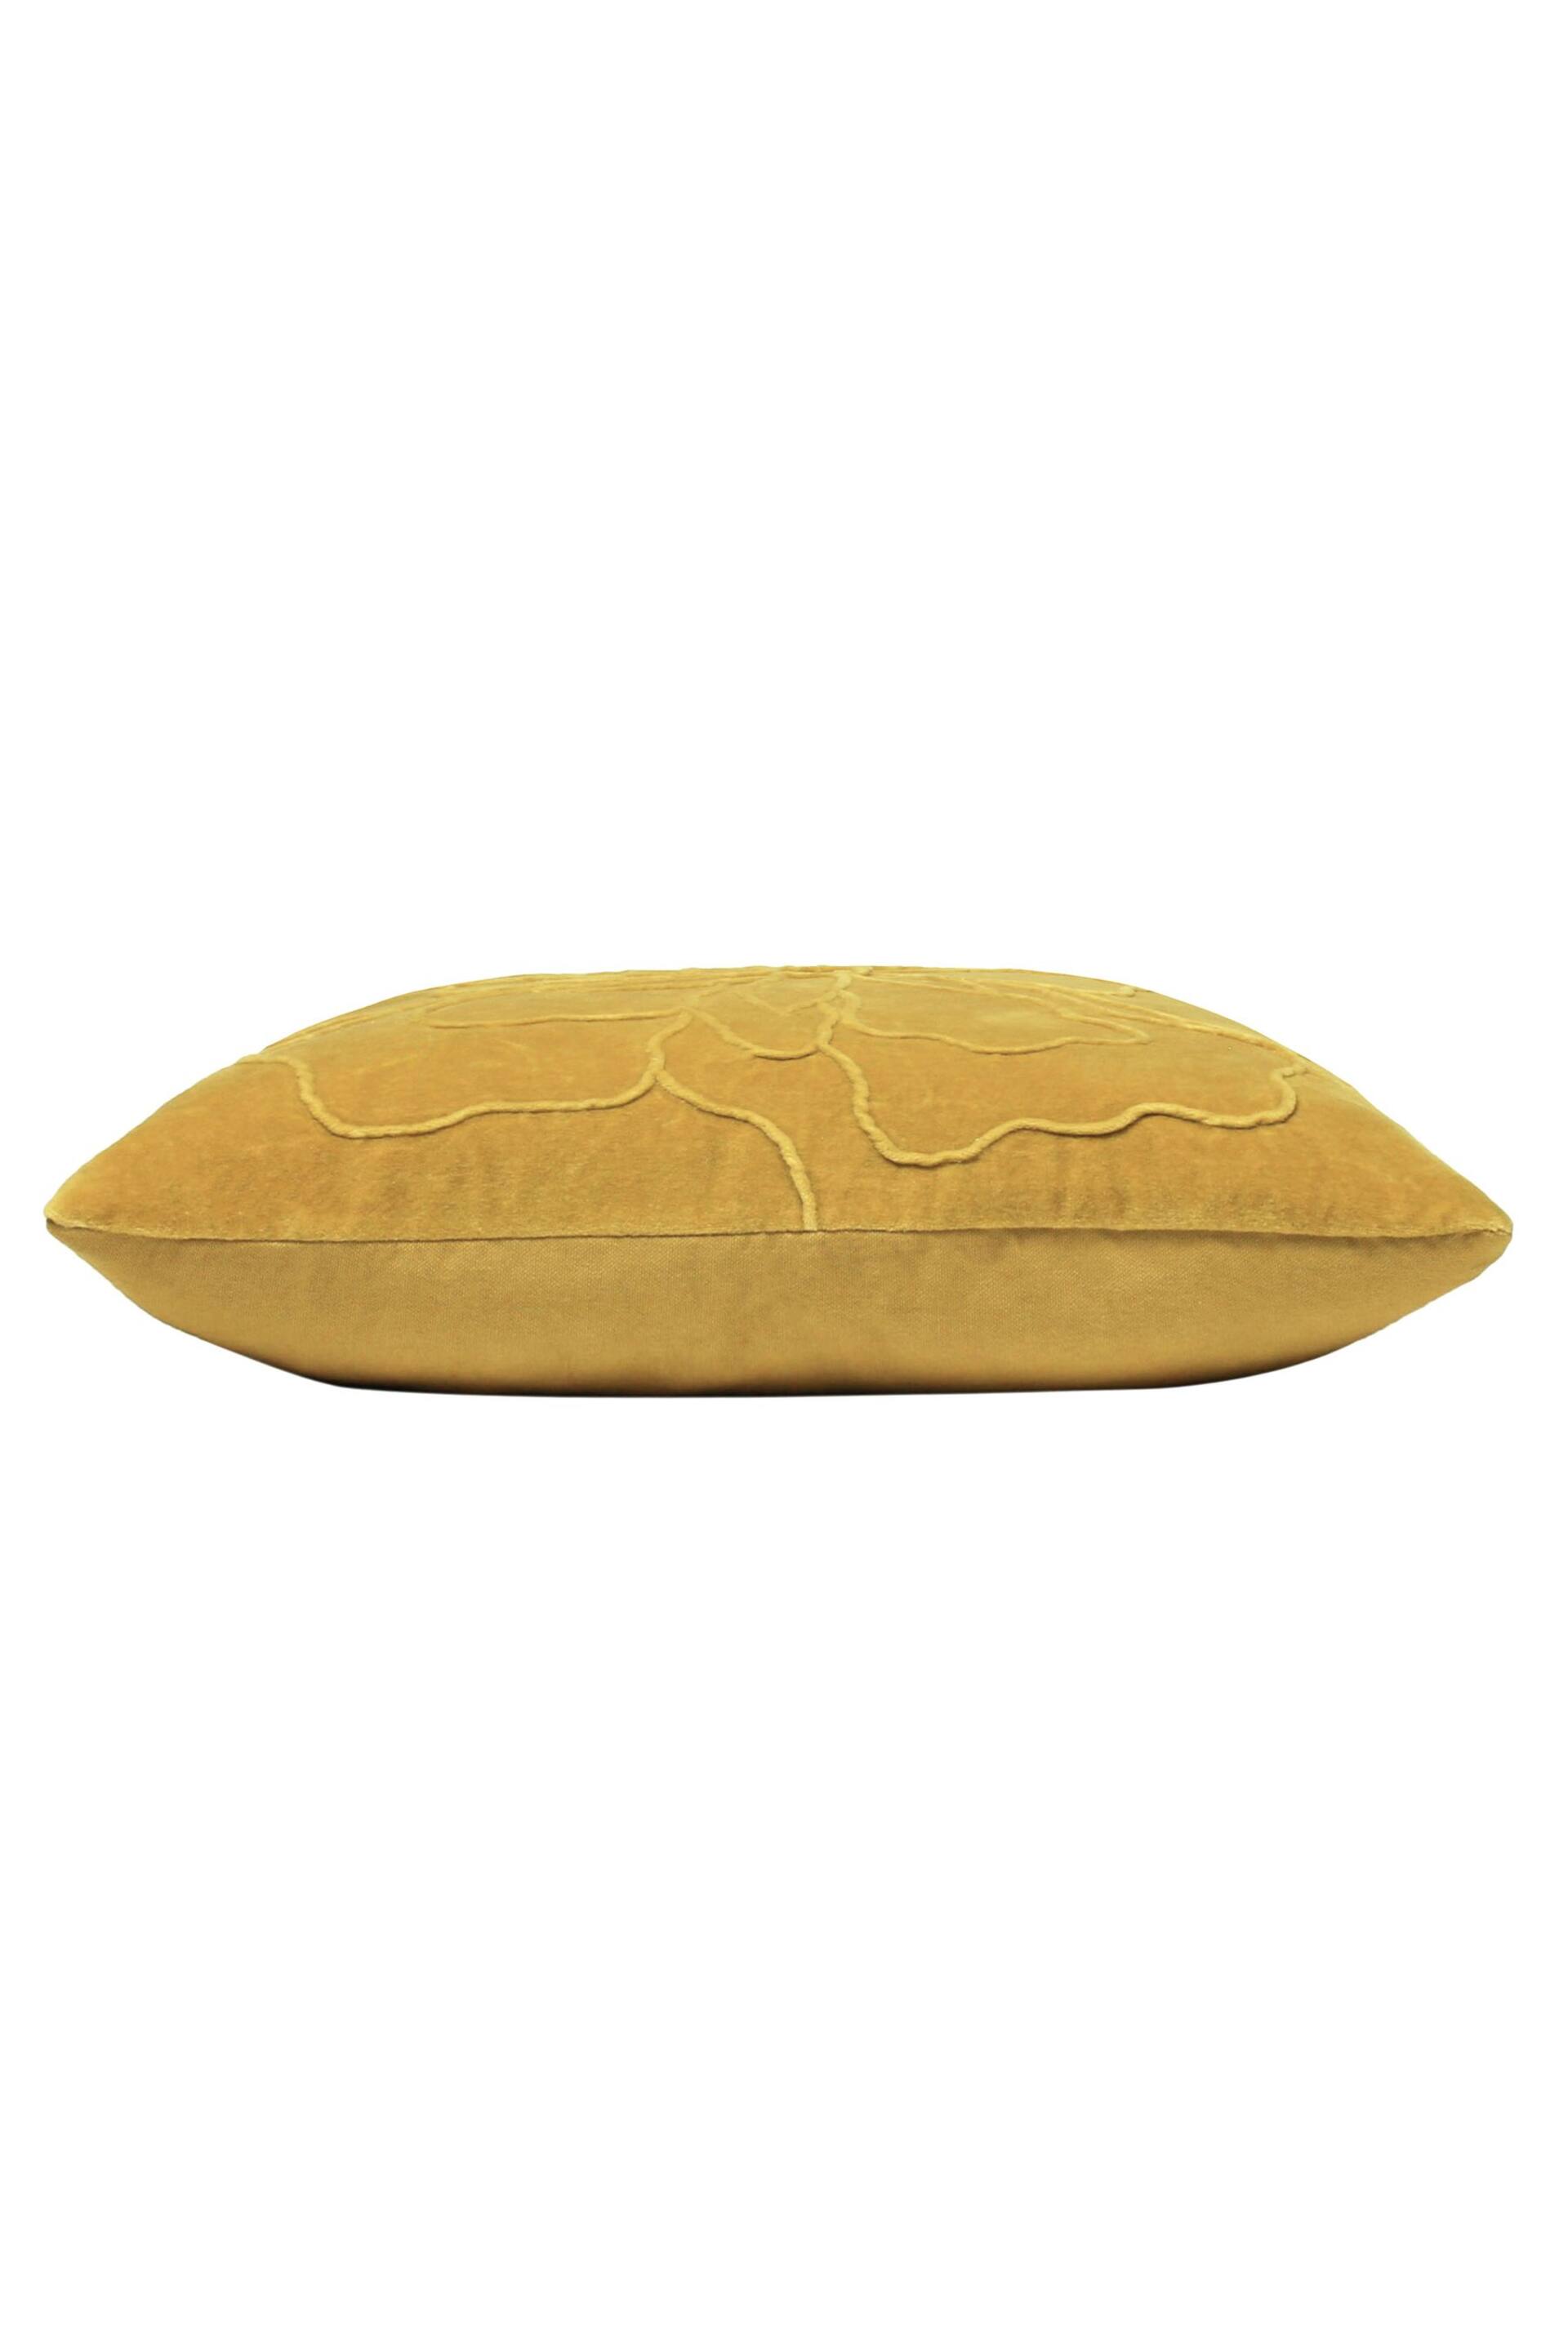 furn. Ochre Yellow Angeles Floral Velvet Polyester Filled Cushion - Image 3 of 4